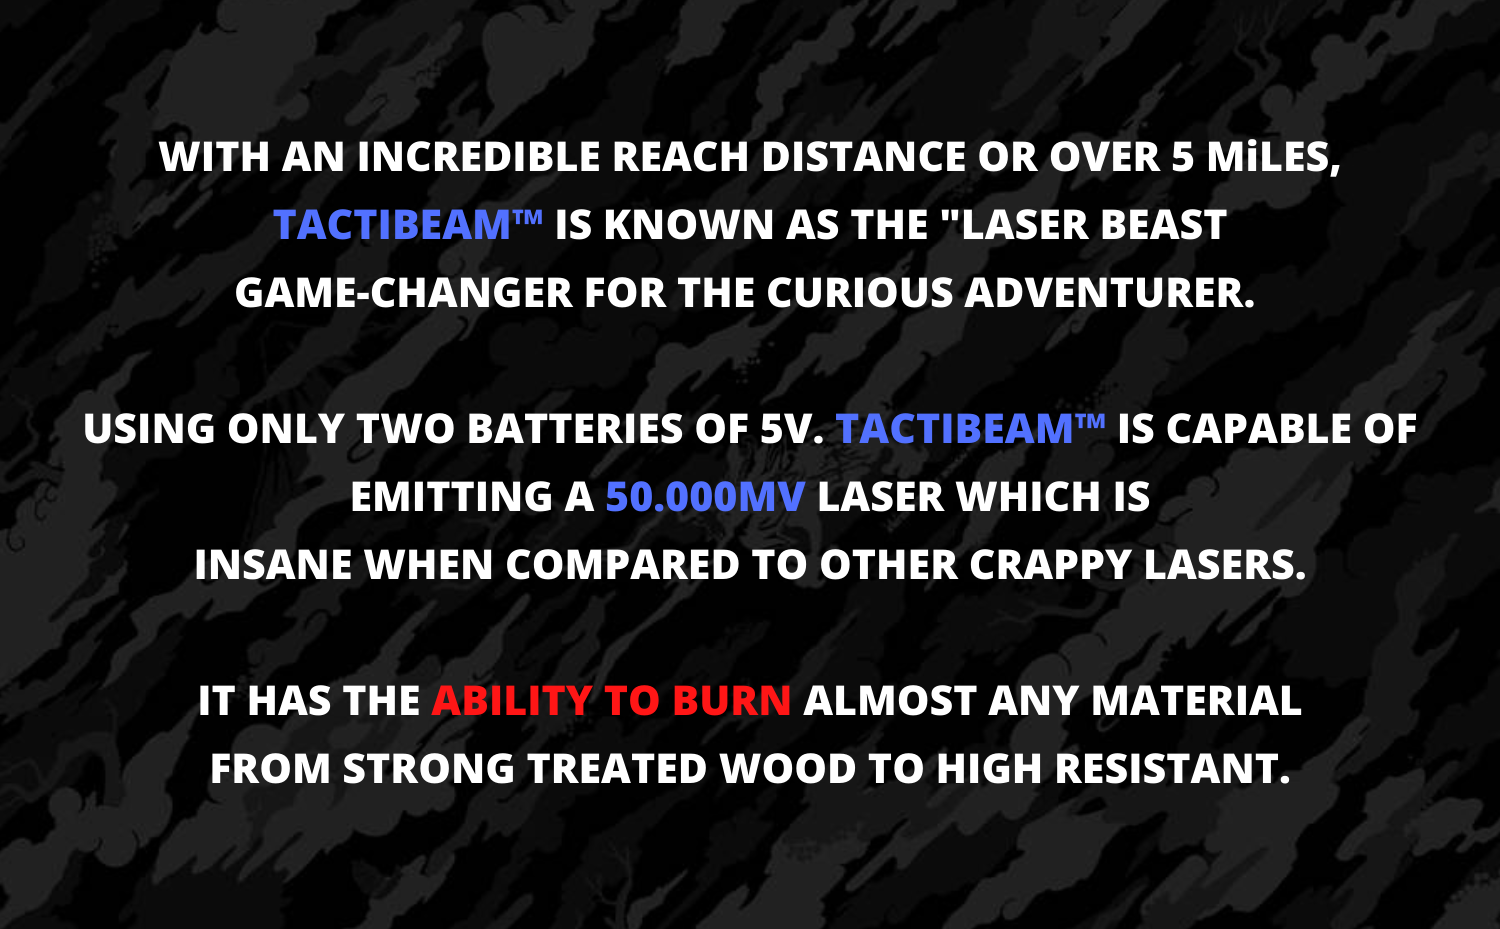 WITH_AN_INCREDIBLE_REACH_DISTANCE_OR_OVER_MiLES_.TACTIBEAM_IS_KNOWN_AS_THE_LASER_BEAST_GAME-CHANGER_FOR_THE_CURIOUS_ADVENTURER._USING_ONLY_TWO_BATTERIES_OF_5V._TACTIBEAM_IS_CAPABLE_OF_3000x3000.png